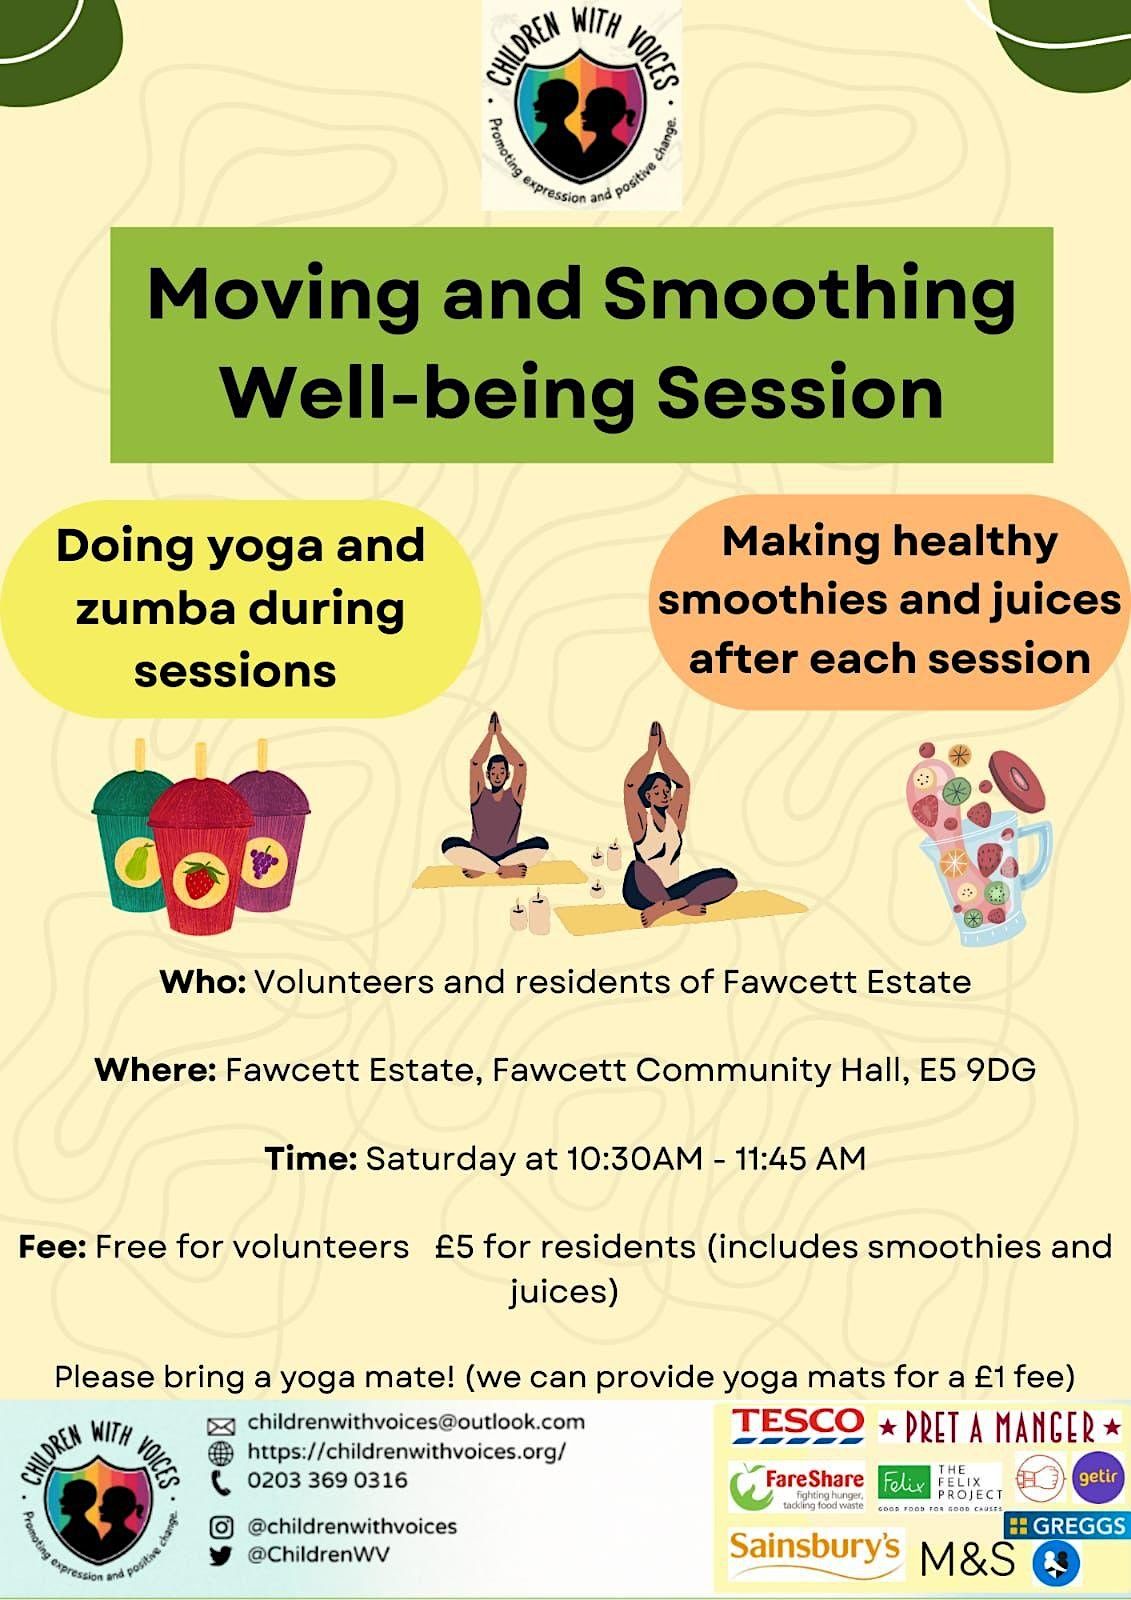 Moving and Smoothing Well-being event